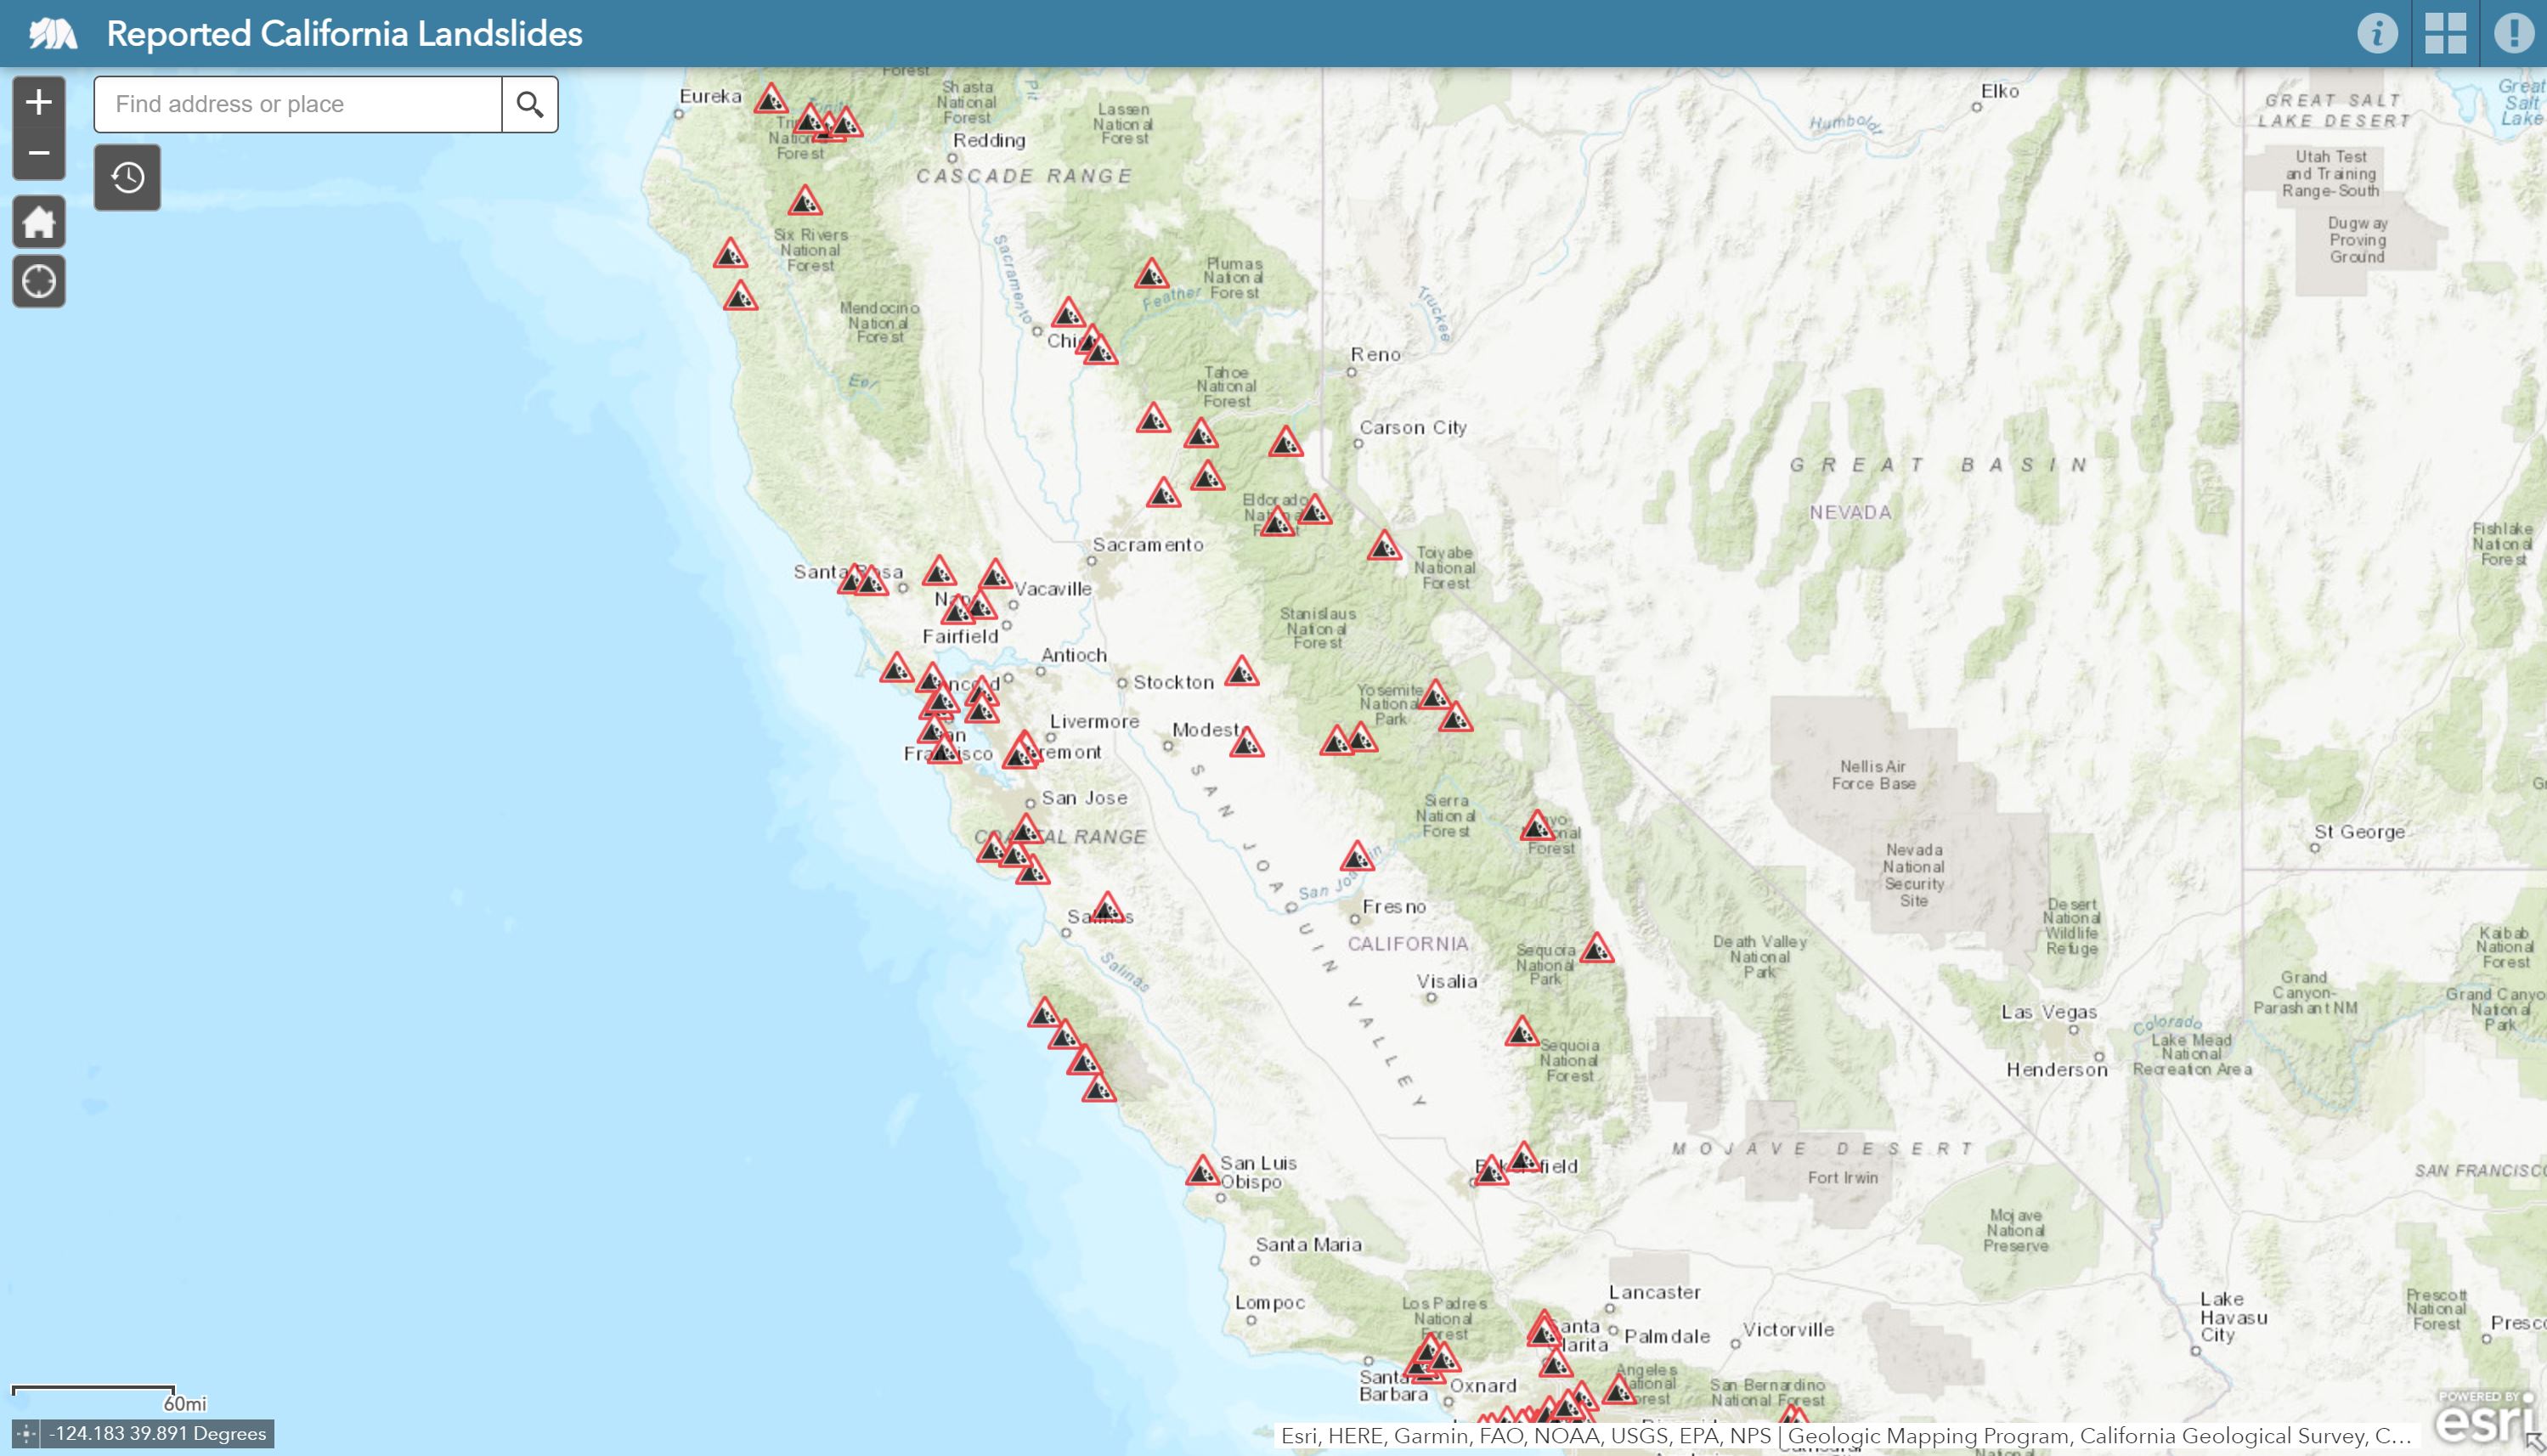 Screen shot of the Reported California Landslides map.